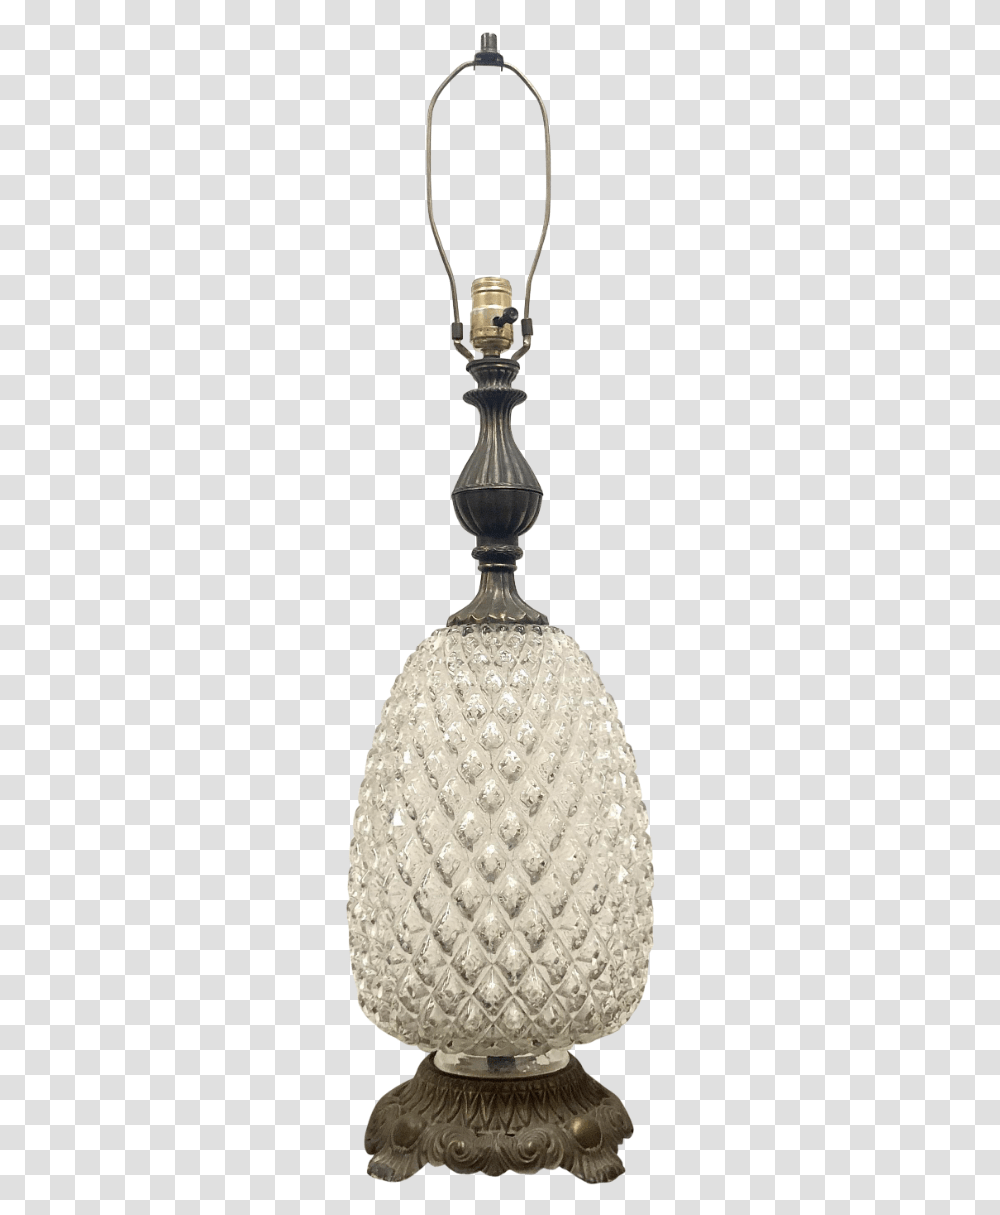 Ef And Ef Industries Brass And Glass Pineapple Locket, Lamp, Lighting, Lampshade, Crystal Transparent Png